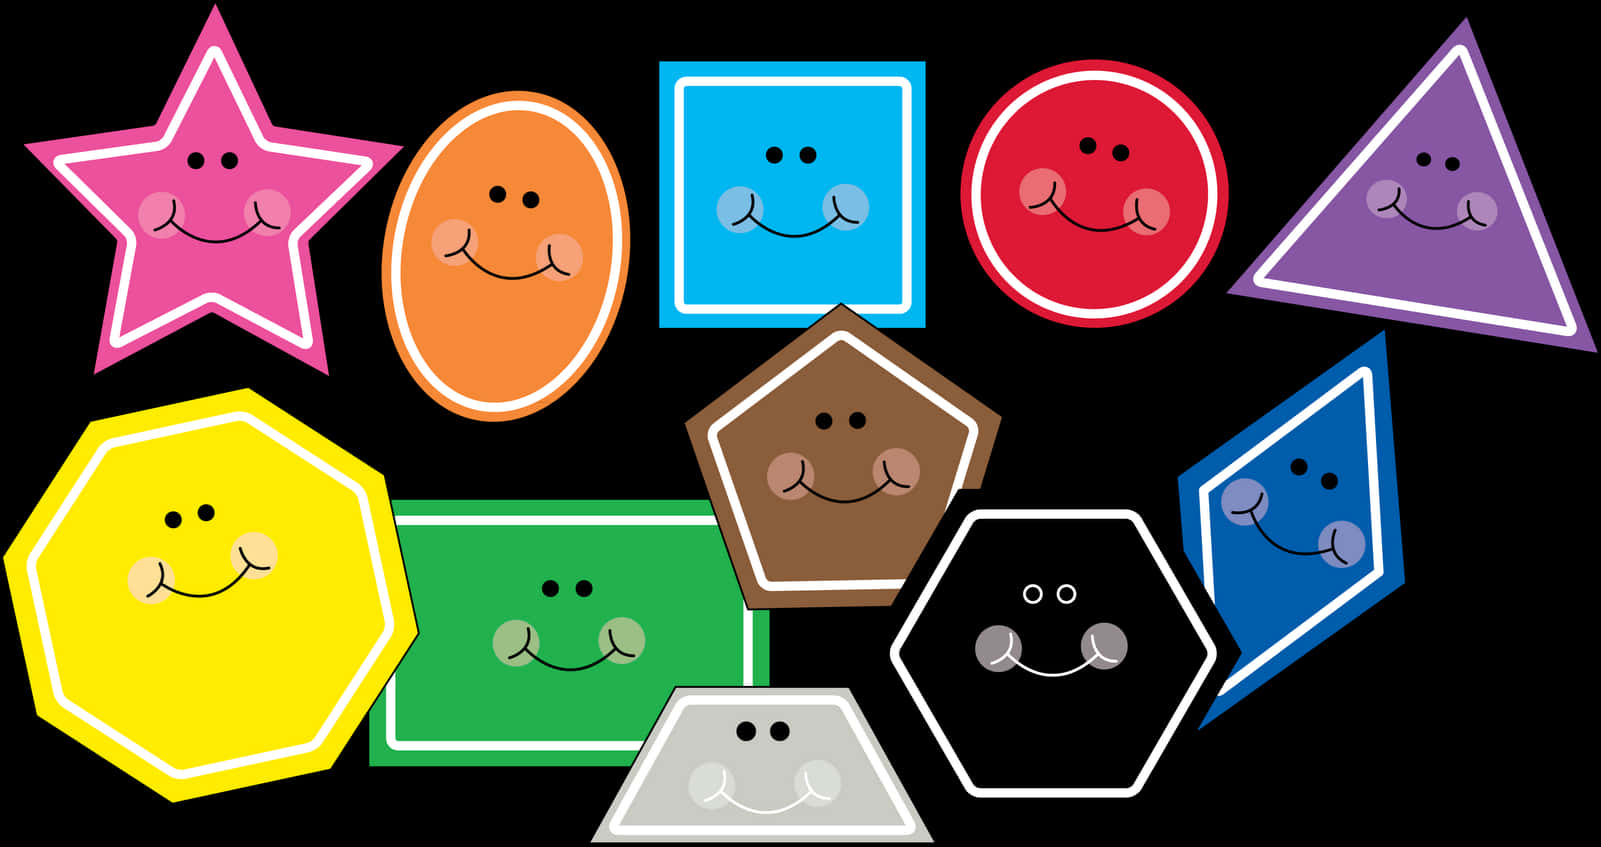 A Group Of Colorful Shapes With Smiling Faces